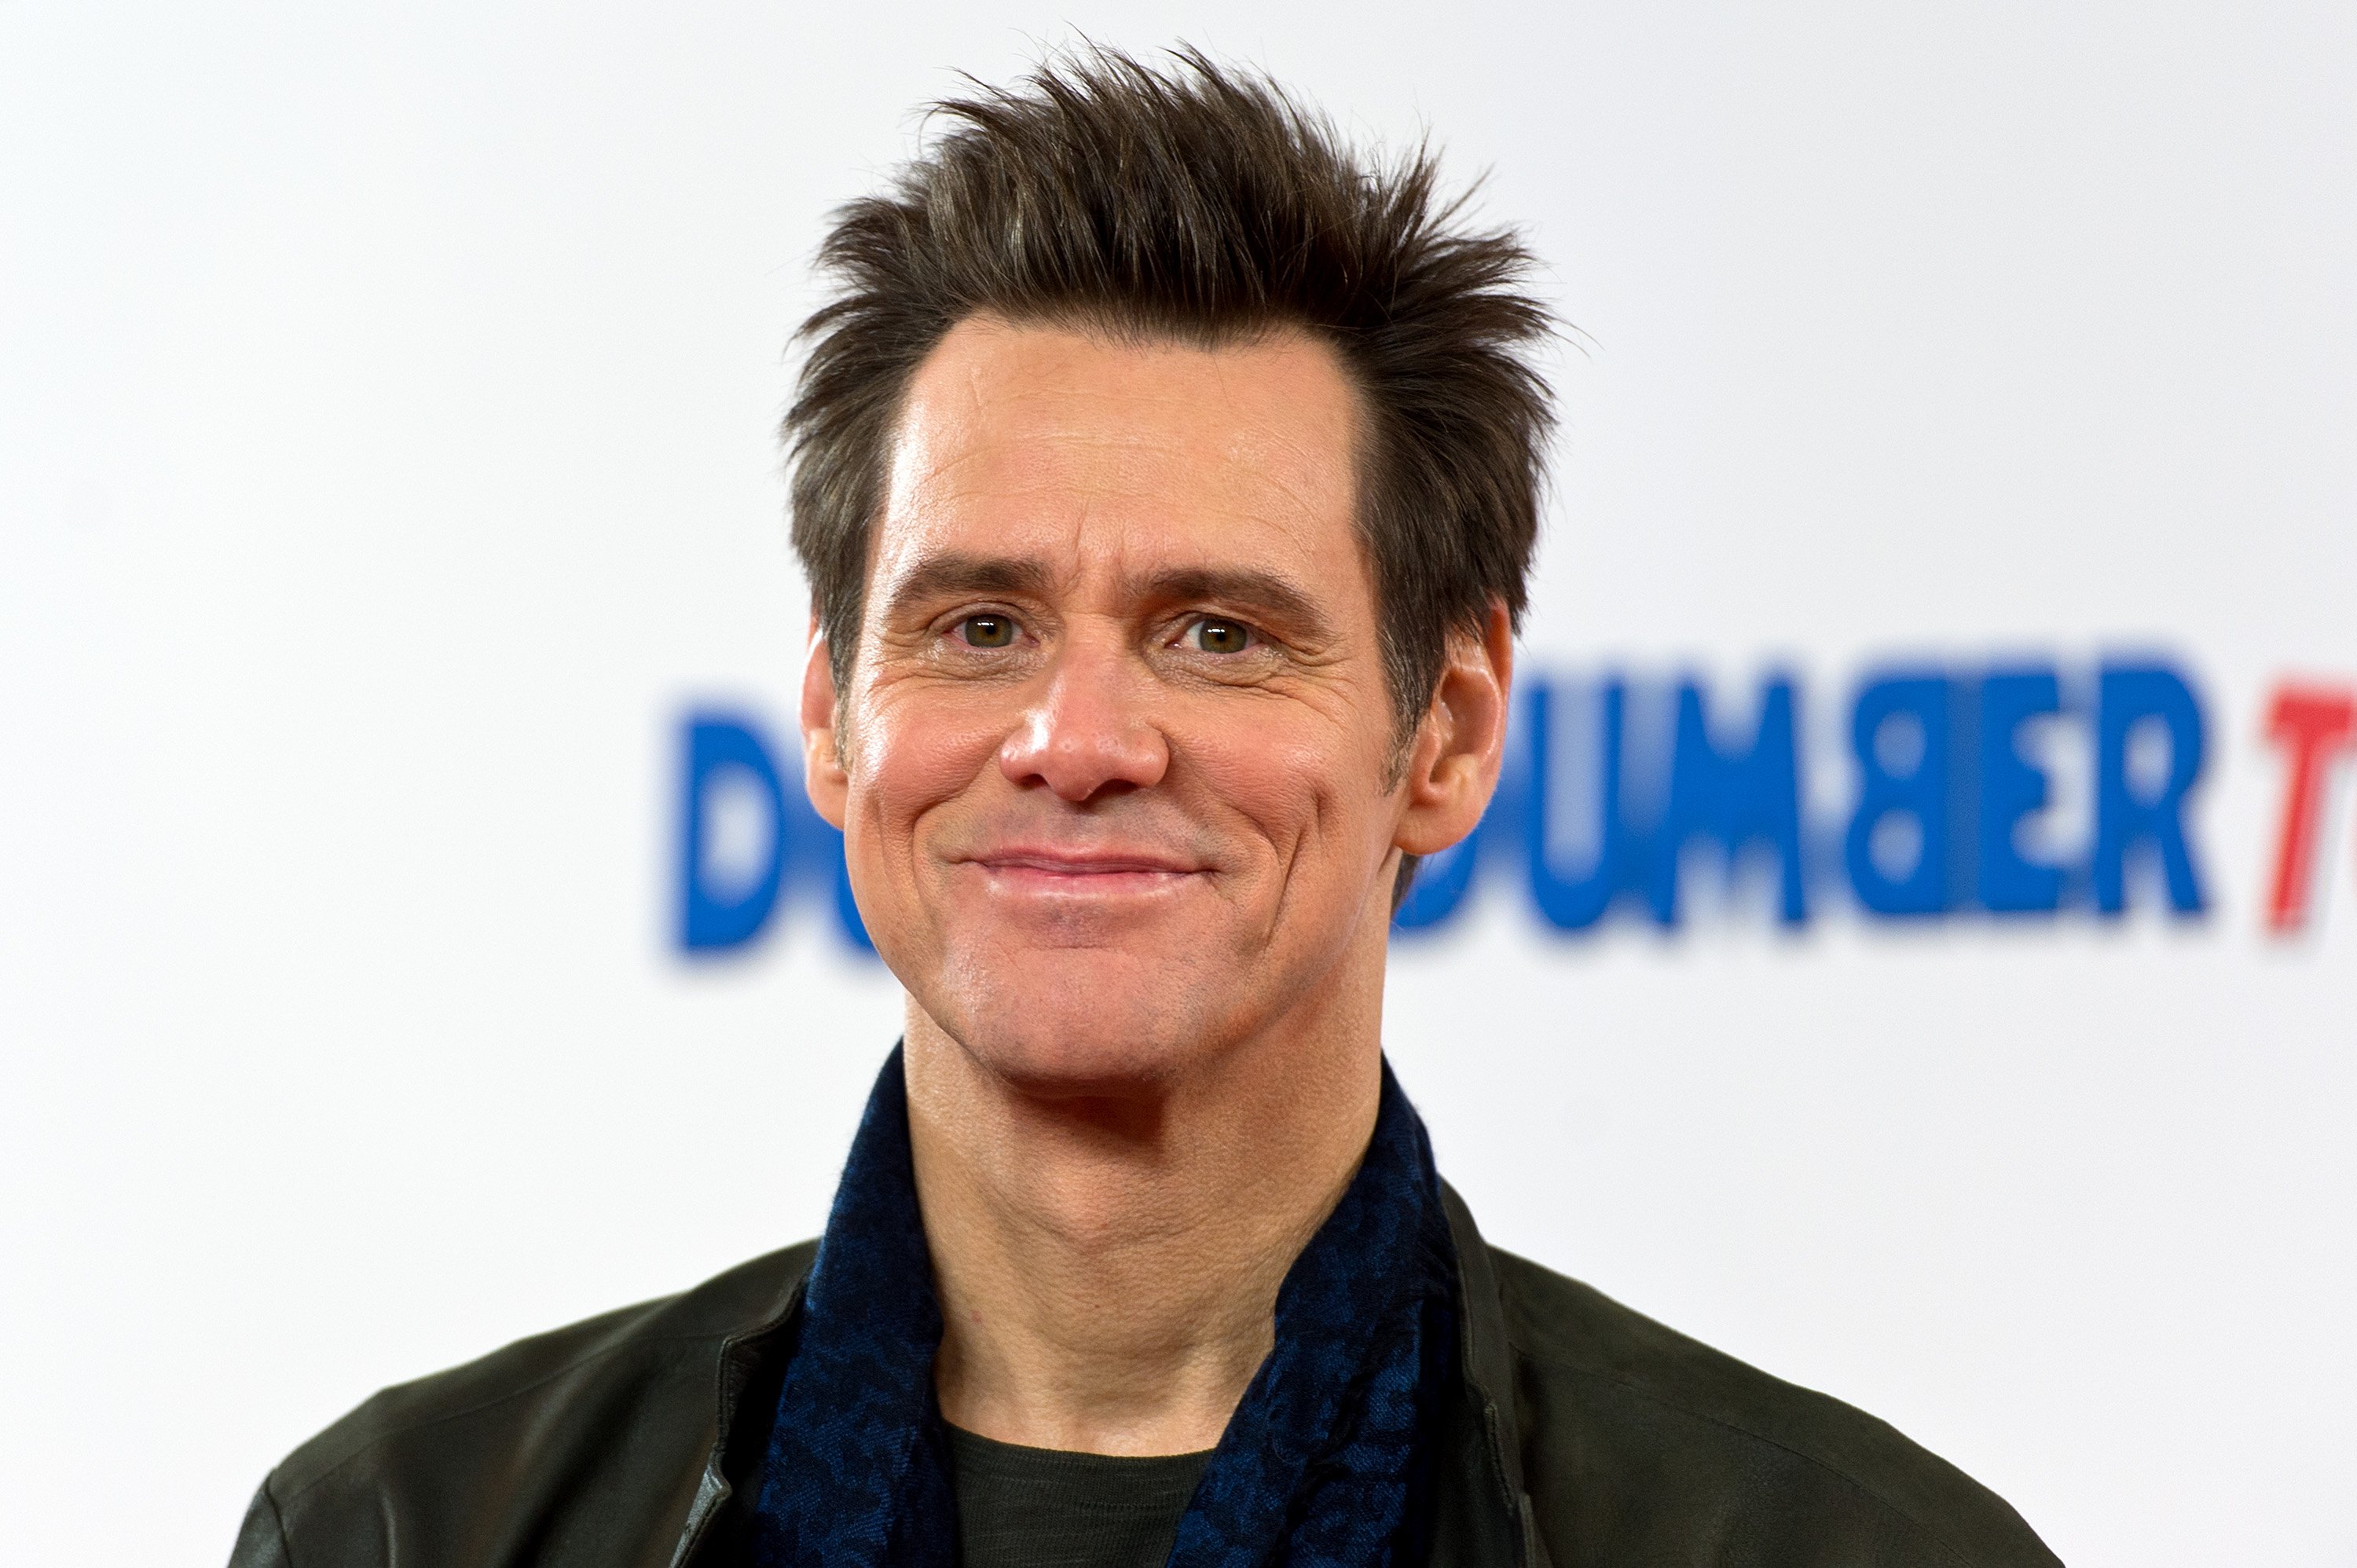 Jim Carrey attends a photocall for "Dumb and Dumber To" on November 20, 2014, in London, England. | Source: Getty Images